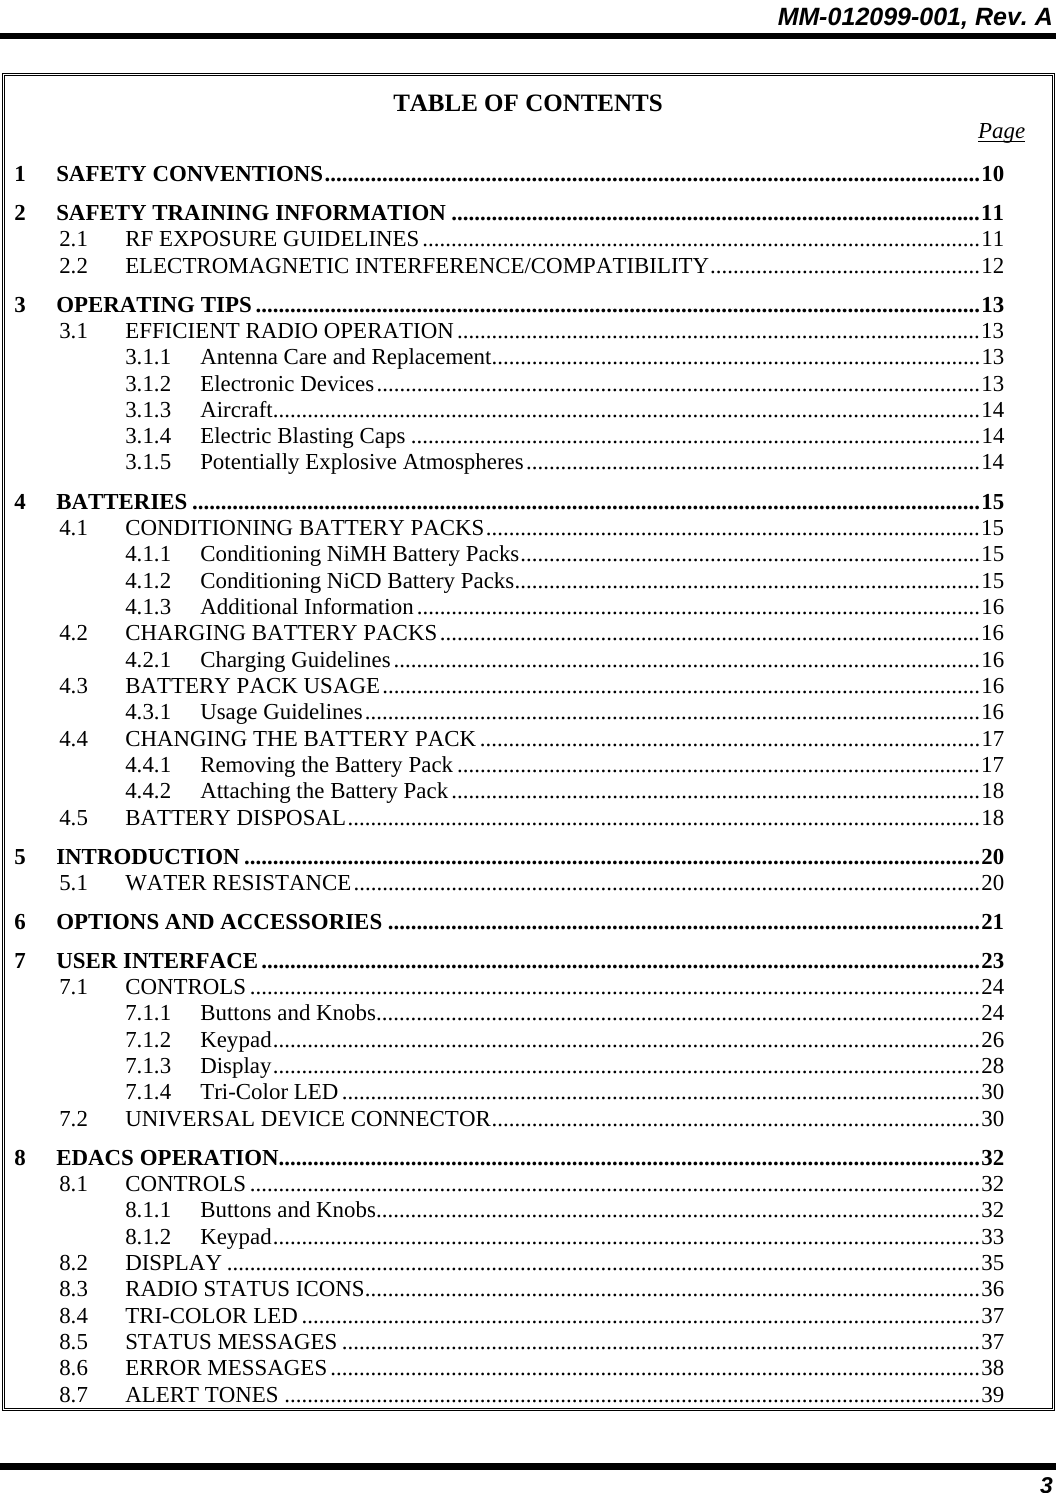 MM-012099-001, Rev. A 3 TABLE OF CONTENTS  Page 1 SAFETY CONVENTIONS..................................................................................................................10 2 SAFETY TRAINING INFORMATION ............................................................................................11 2.1 RF EXPOSURE GUIDELINES.................................................................................................11 2.2 ELECTROMAGNETIC INTERFERENCE/COMPATIBILITY...............................................12 3 OPERATING TIPS ..............................................................................................................................13 3.1 EFFICIENT RADIO OPERATION...........................................................................................13 3.1.1 Antenna Care and Replacement.....................................................................................13 3.1.2 Electronic Devices.........................................................................................................13 3.1.3 Aircraft...........................................................................................................................14 3.1.4 Electric Blasting Caps ...................................................................................................14 3.1.5 Potentially Explosive Atmospheres...............................................................................14 4 BATTERIES .........................................................................................................................................15 4.1 CONDITIONING BATTERY PACKS......................................................................................15 4.1.1 Conditioning NiMH Battery Packs................................................................................15 4.1.2 Conditioning NiCD Battery Packs.................................................................................15 4.1.3 Additional Information..................................................................................................16 4.2 CHARGING BATTERY PACKS..............................................................................................16 4.2.1 Charging Guidelines......................................................................................................16 4.3 BATTERY PACK USAGE........................................................................................................16 4.3.1 Usage Guidelines...........................................................................................................16 4.4 CHANGING THE BATTERY PACK .......................................................................................17 4.4.1 Removing the Battery Pack ...........................................................................................17 4.4.2 Attaching the Battery Pack............................................................................................18 4.5 BATTERY DISPOSAL..............................................................................................................18 5 INTRODUCTION ................................................................................................................................20 5.1 WATER RESISTANCE.............................................................................................................20 6 OPTIONS AND ACCESSORIES .......................................................................................................21 7 USER INTERFACE.............................................................................................................................23 7.1 CONTROLS...............................................................................................................................24 7.1.1 Buttons and Knobs.........................................................................................................24 7.1.2 Keypad...........................................................................................................................26 7.1.3 Display...........................................................................................................................28 7.1.4 Tri-Color LED...............................................................................................................30 7.2 UNIVERSAL DEVICE CONNECTOR.....................................................................................30 8 EDACS OPERATION..........................................................................................................................32 8.1 CONTROLS...............................................................................................................................32 8.1.1 Buttons and Knobs.........................................................................................................32 8.1.2 Keypad...........................................................................................................................33 8.2 DISPLAY ...................................................................................................................................35 8.3 RADIO STATUS ICONS...........................................................................................................36 8.4 TRI-COLOR LED......................................................................................................................37 8.5 STATUS MESSAGES ...............................................................................................................37 8.6 ERROR MESSAGES.................................................................................................................38 8.7 ALERT TONES .........................................................................................................................39 